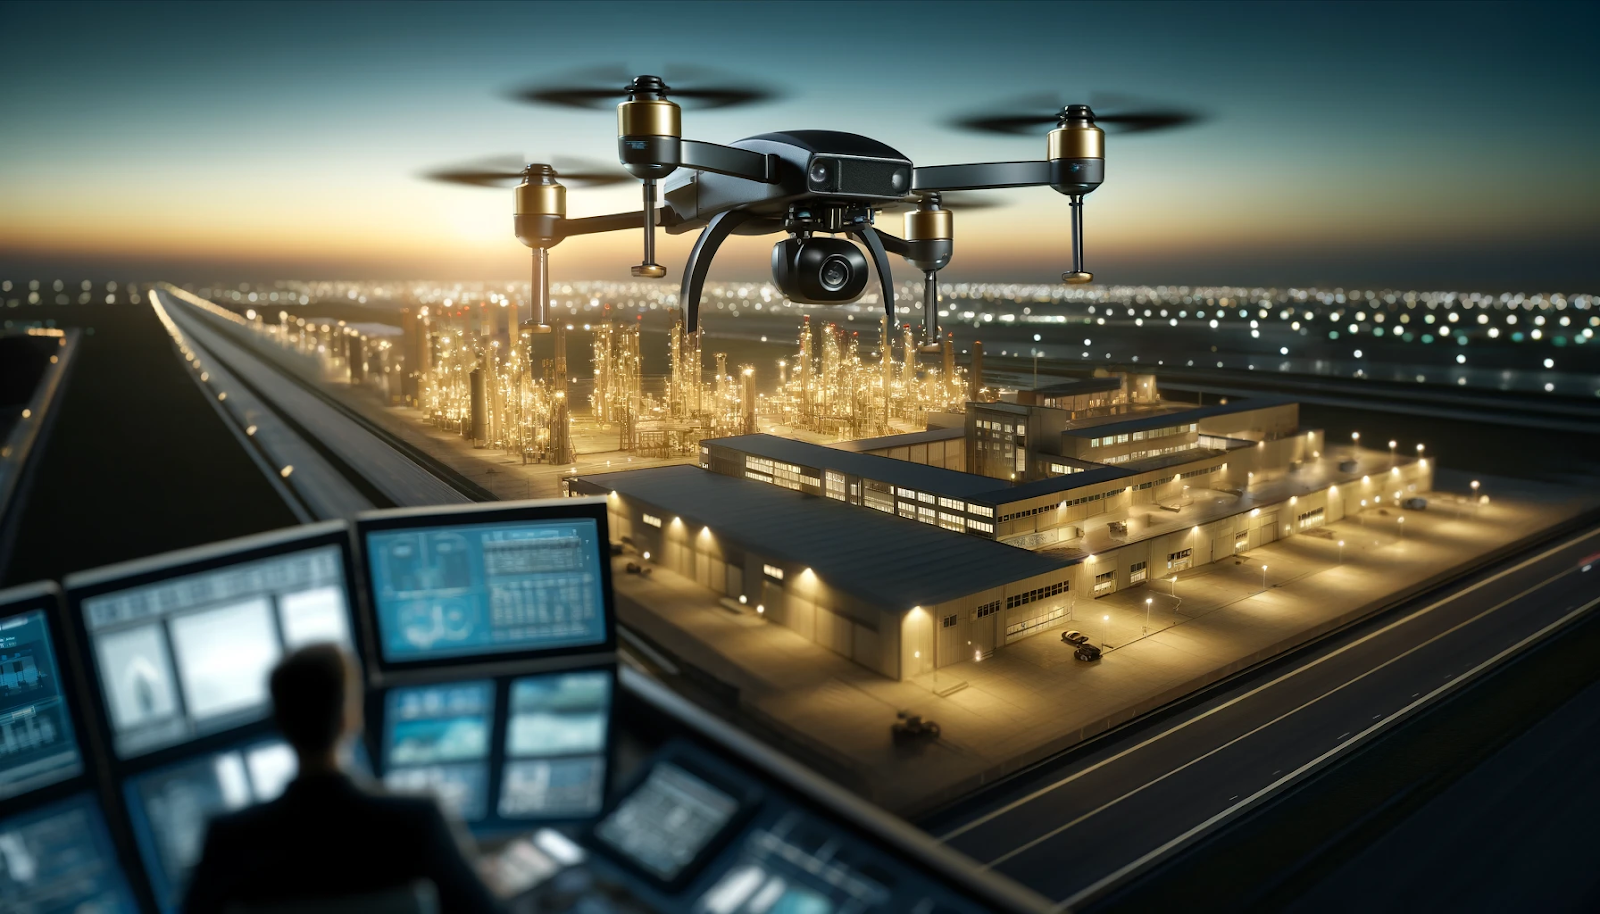 A black and gold drone equipped with high-definition cameras flying over a large industrial complex at dusk, representing modern drone technology used for enhanced security surveillance.